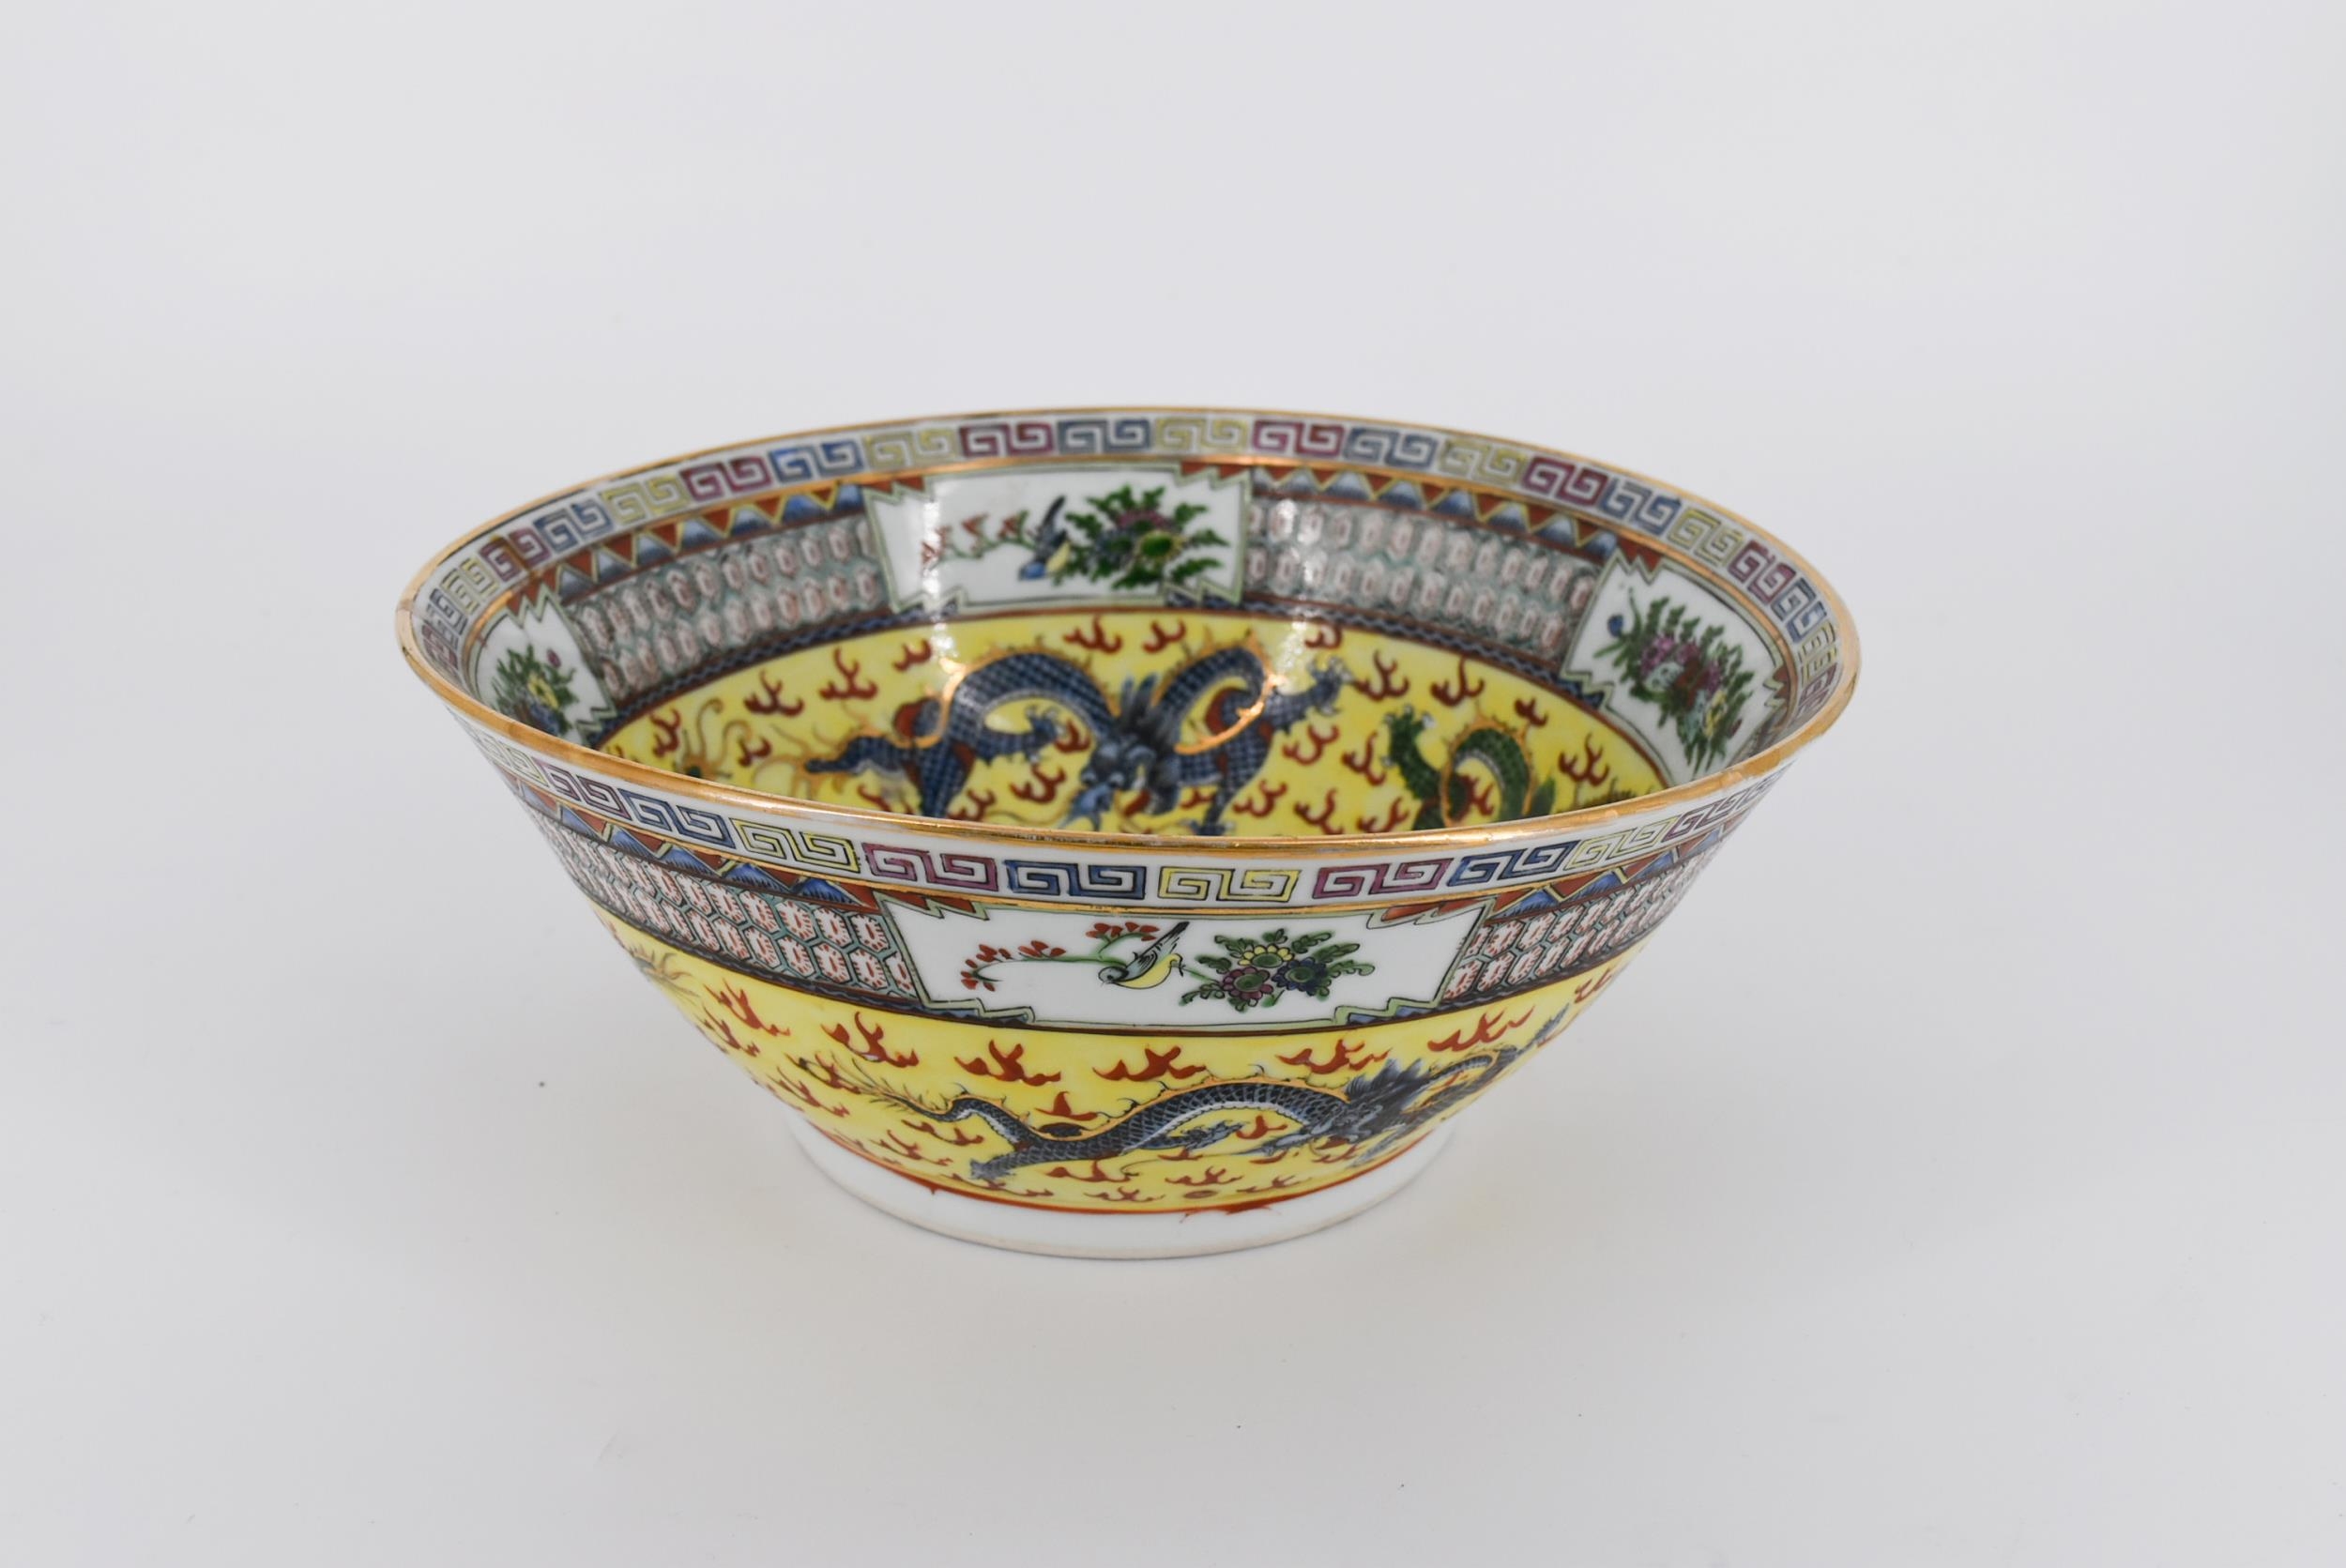 A 20th century Chinese porcelain bowl with dragon decoration along with a rose design and gilded - Image 2 of 7